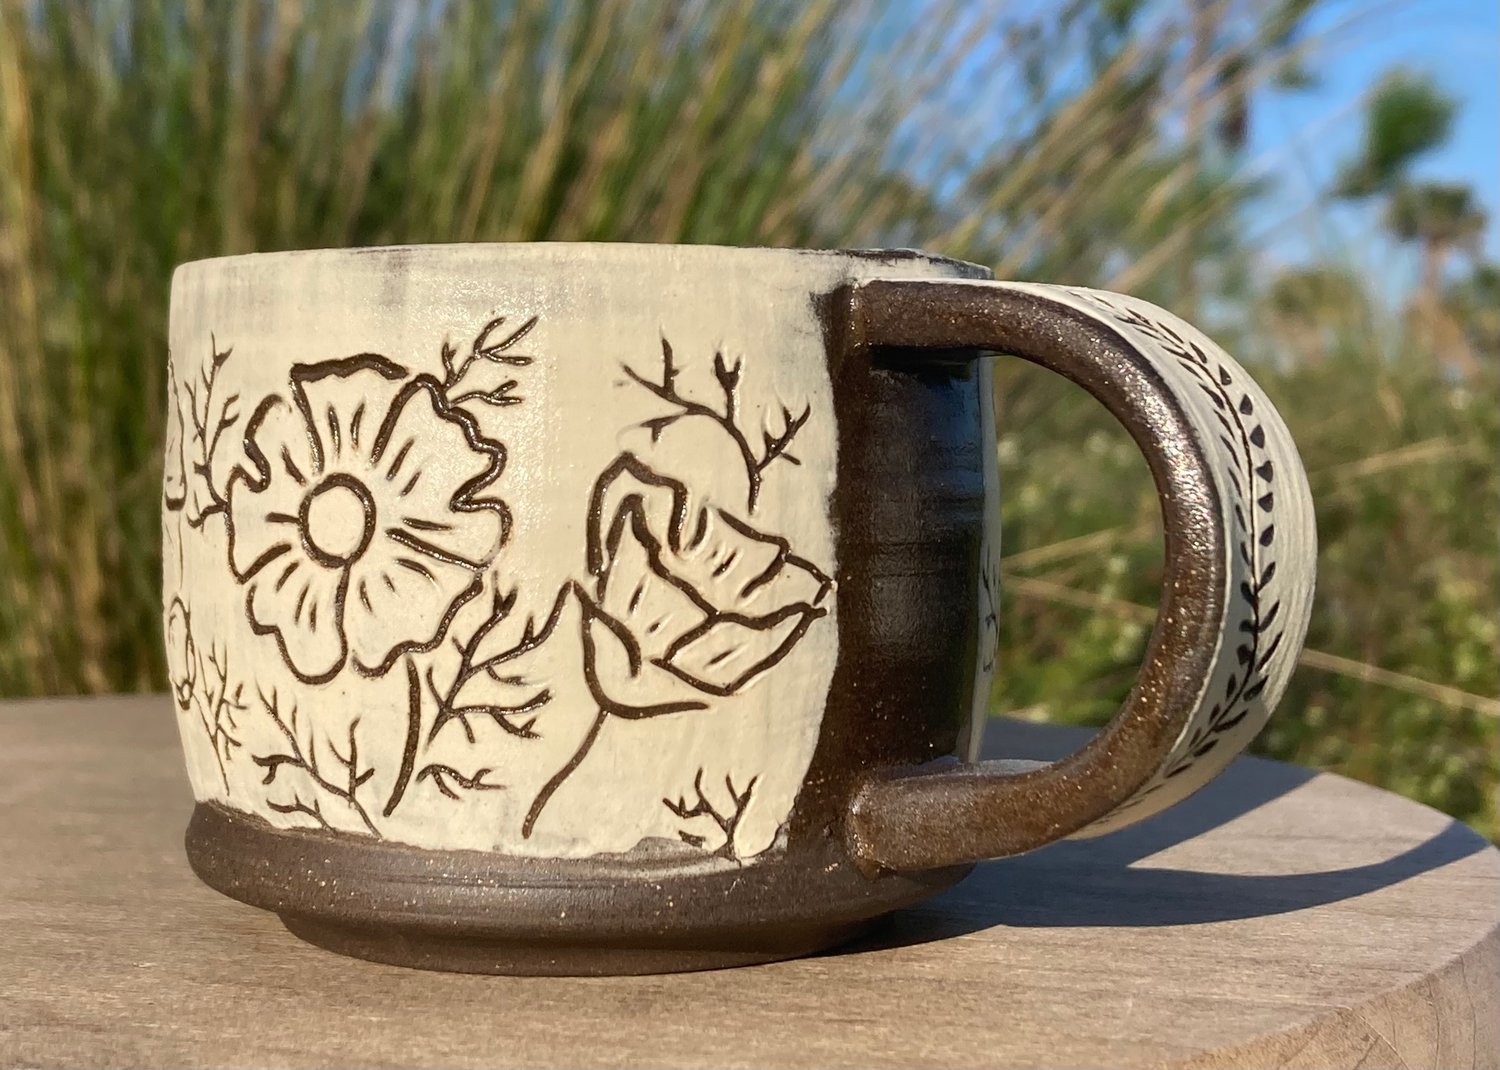 https://assets.bigcartel.com/product_images/721281f7-dfe2-4956-837b-19ed0ce74099/carved-cosmos-mug-6-oz.jpg?auto=format&fit=max&w=1500